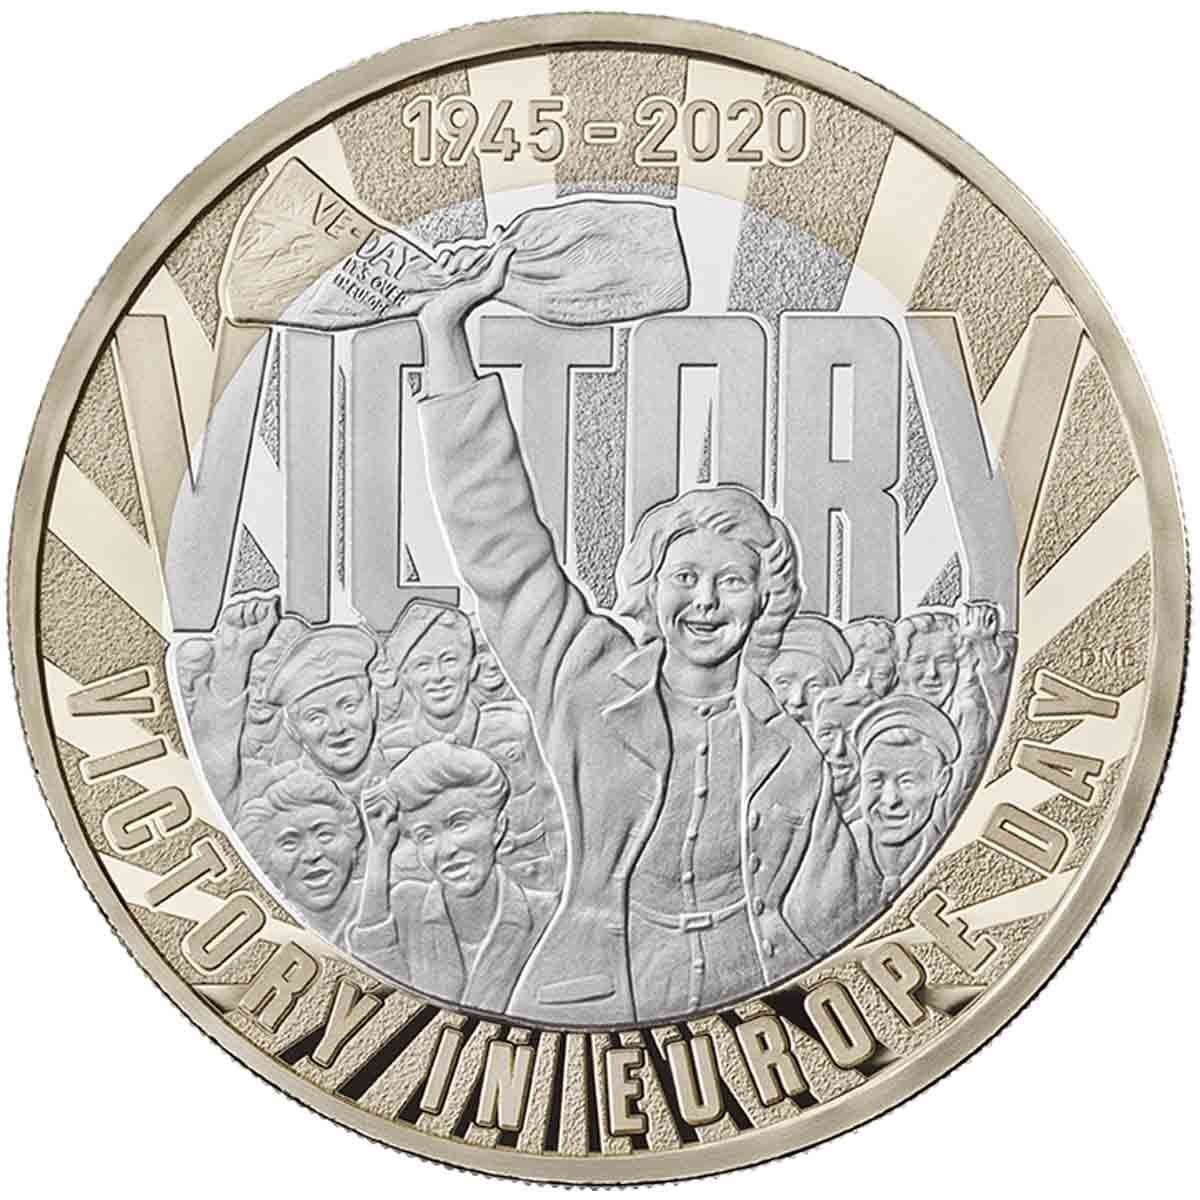 2020 £2 VE Day Silver Proof